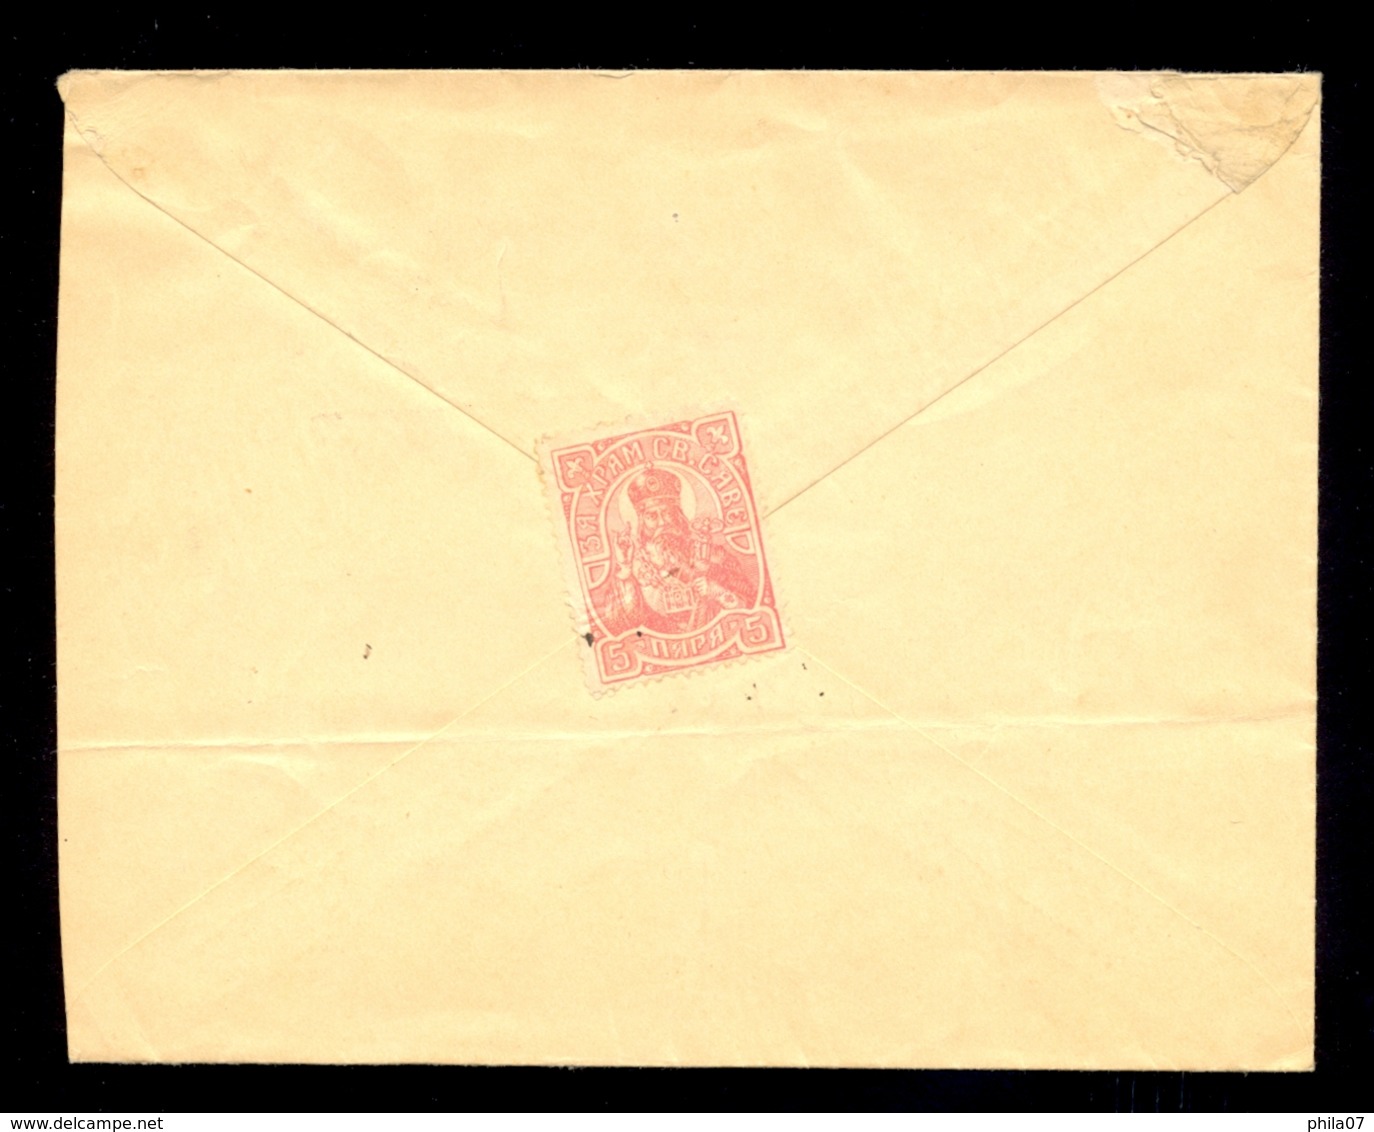 Serbia - Envelope With Imprinted Stamp Additionally Franked And Sent From Izbište To Vršac 06.03. 1913. - Serbia